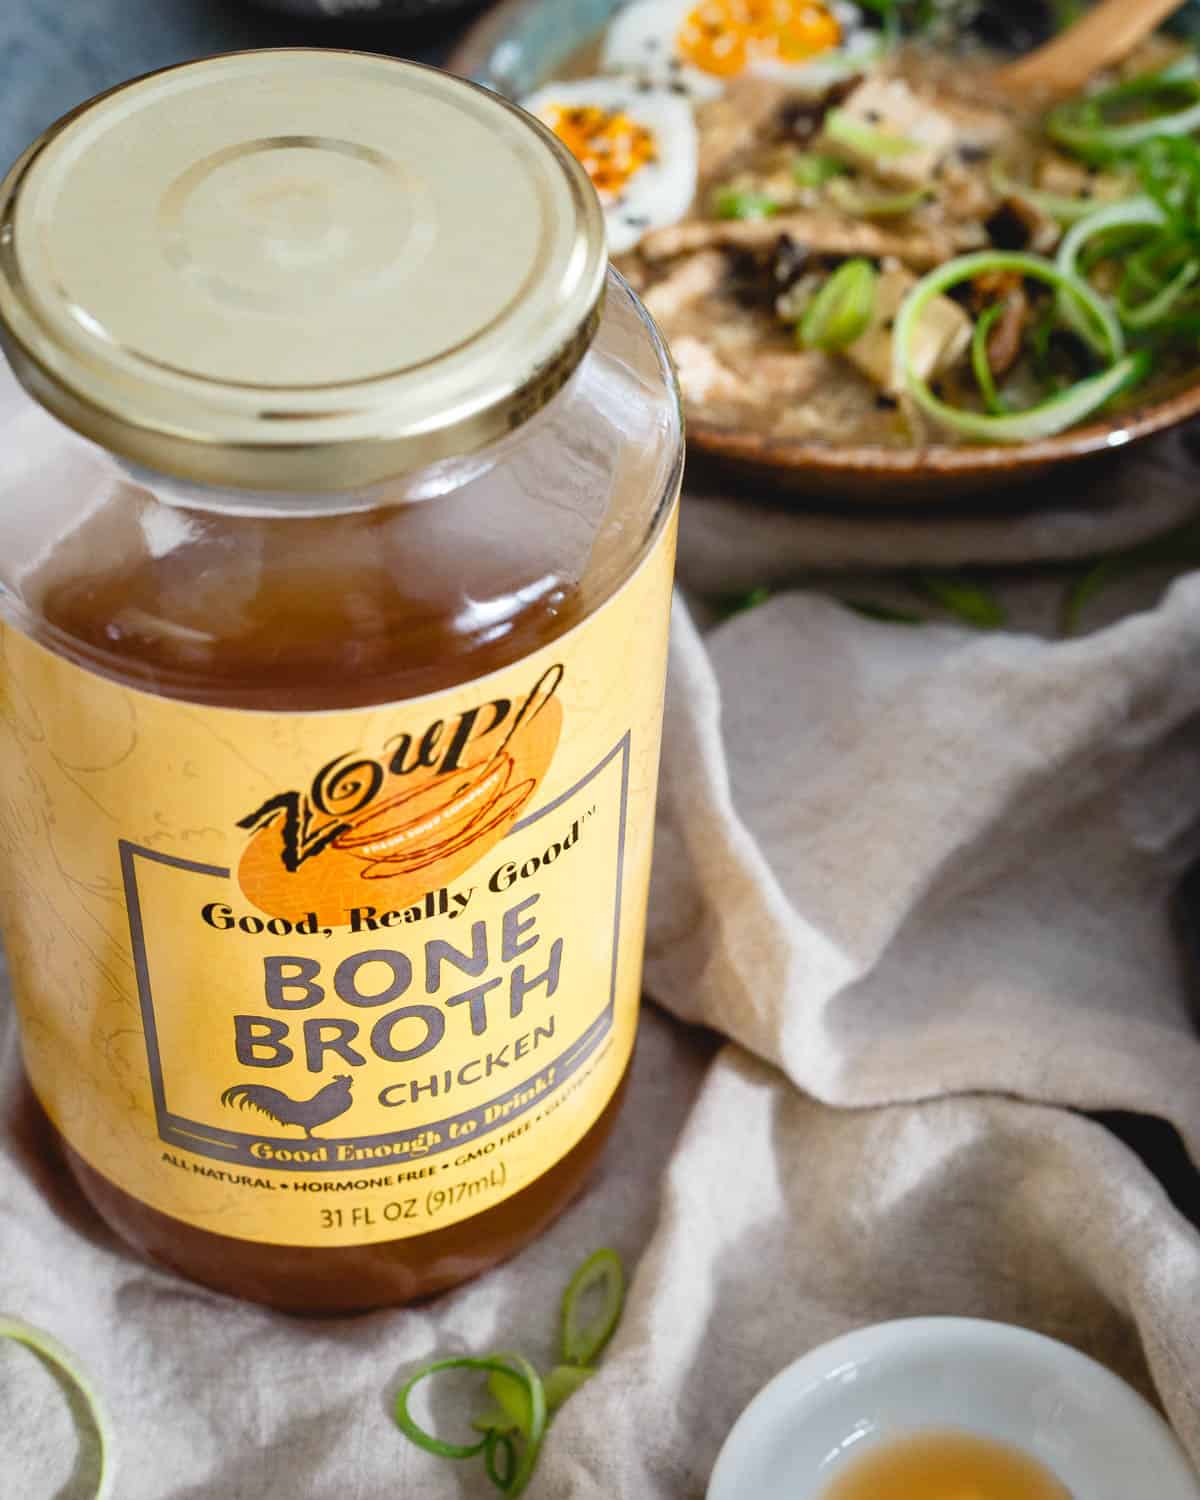 Good soup starts with good broth. Zoup! chicken bone broth brings a deep, delicious flavor base to this hot and sour egg drop soup.